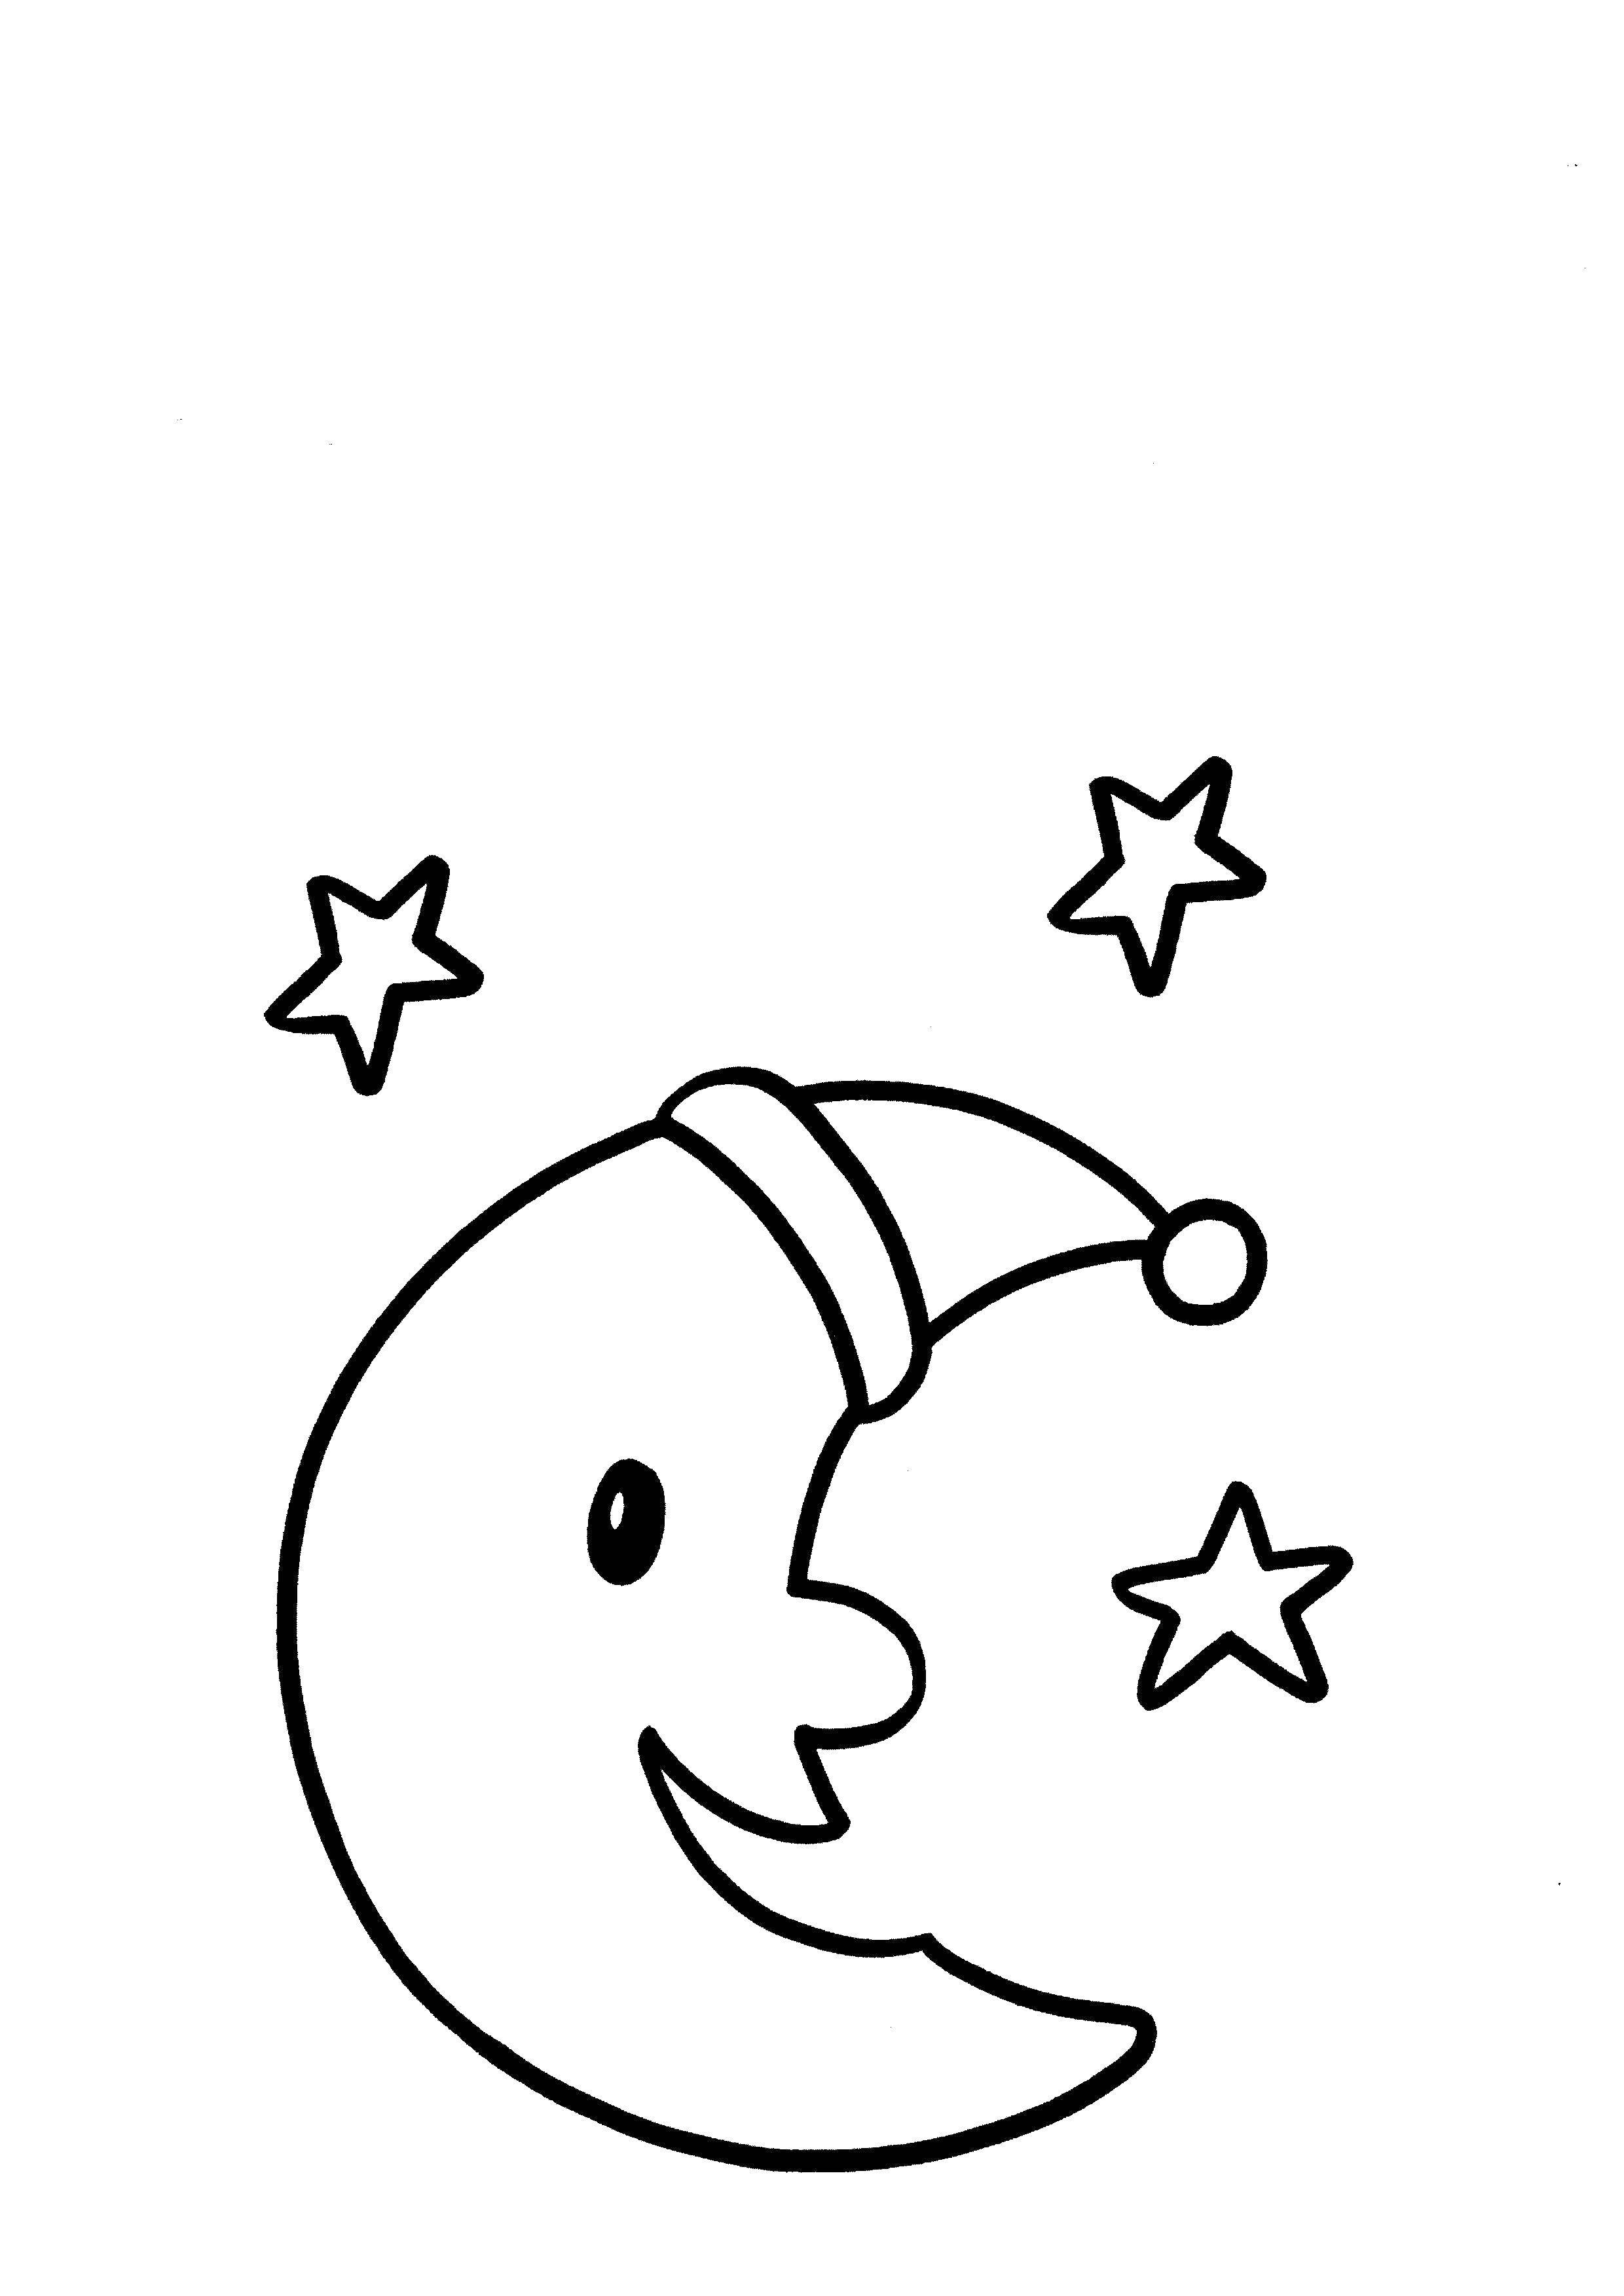 Coloring The moon and the stars. Category moon. Tags:  the moon, stars.